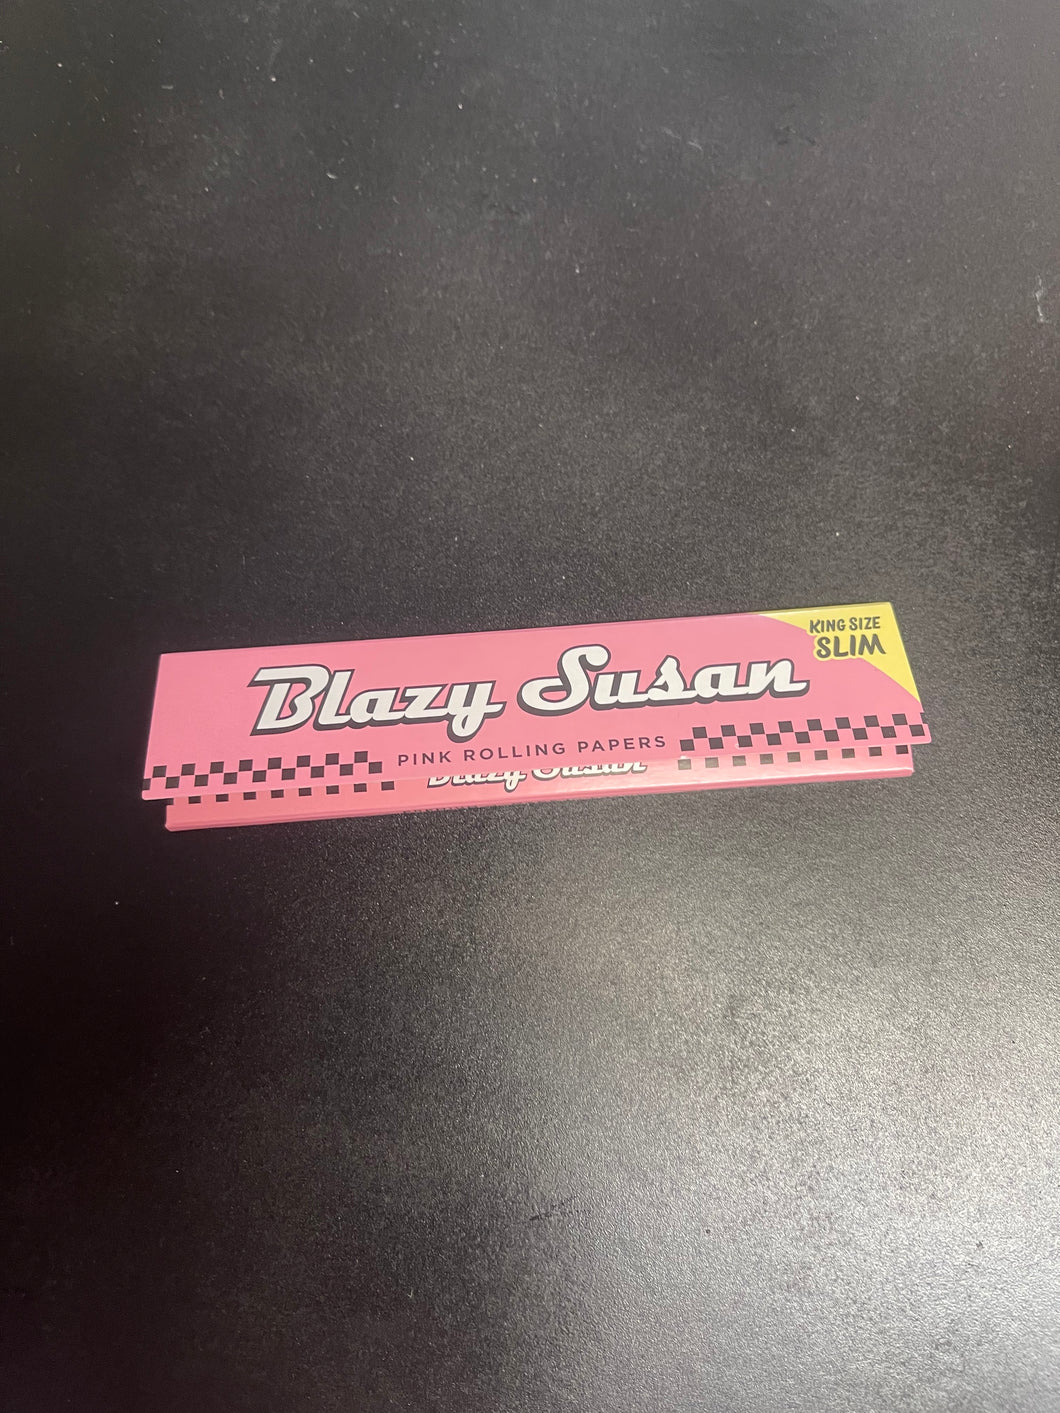 Blazy Susan King size Rolling papers